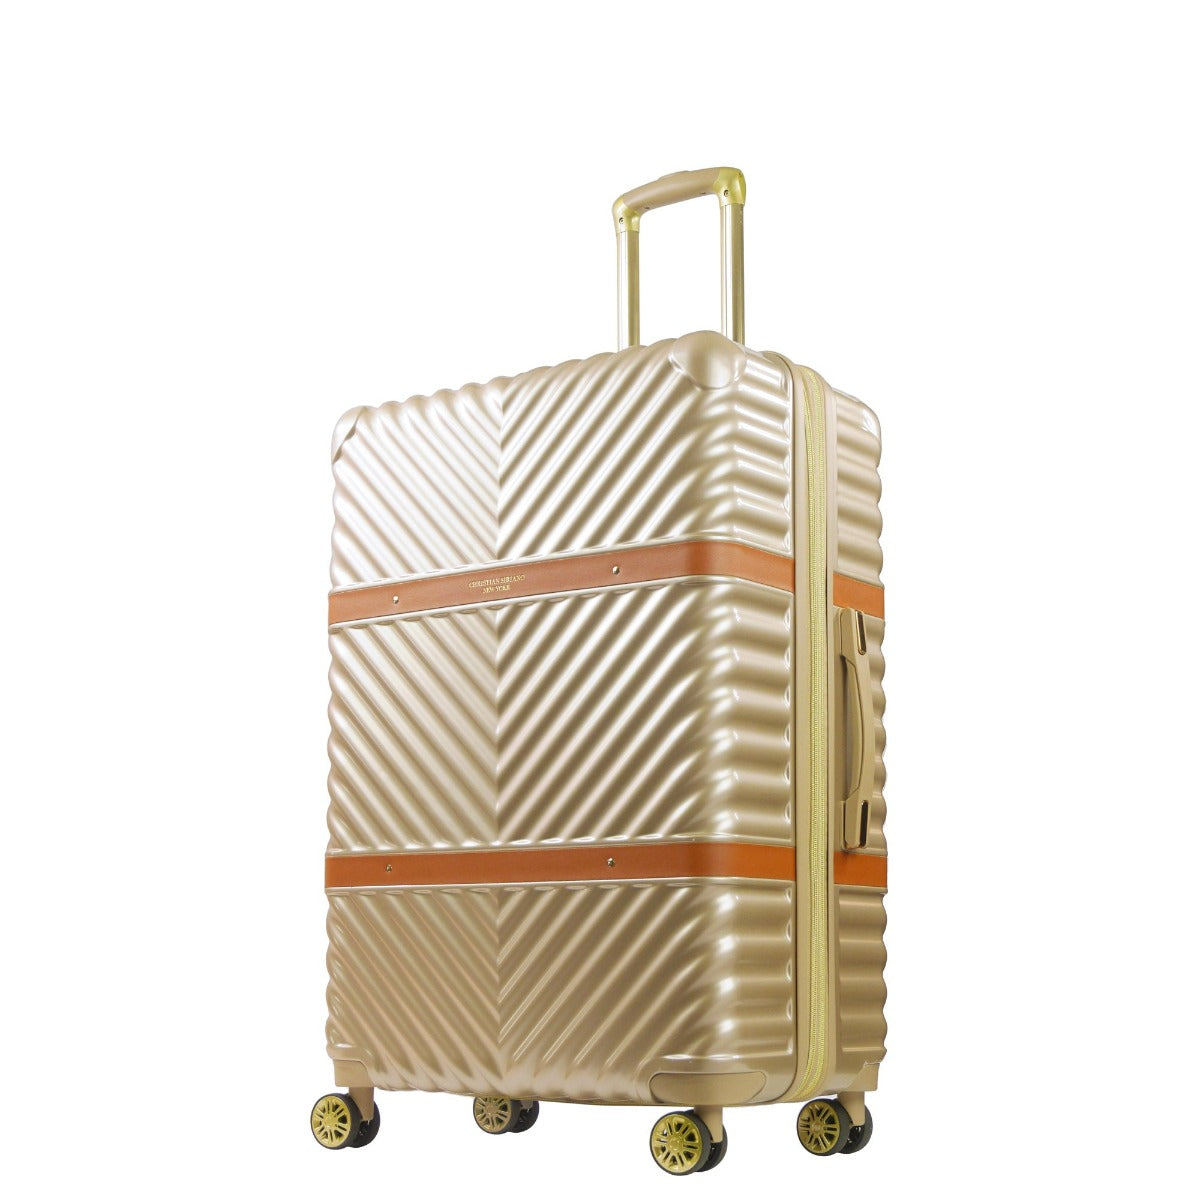 Christian Siriano New York Stella 29" checked luggage hardside spinner suitcase taupe - best durable suitcases for travel